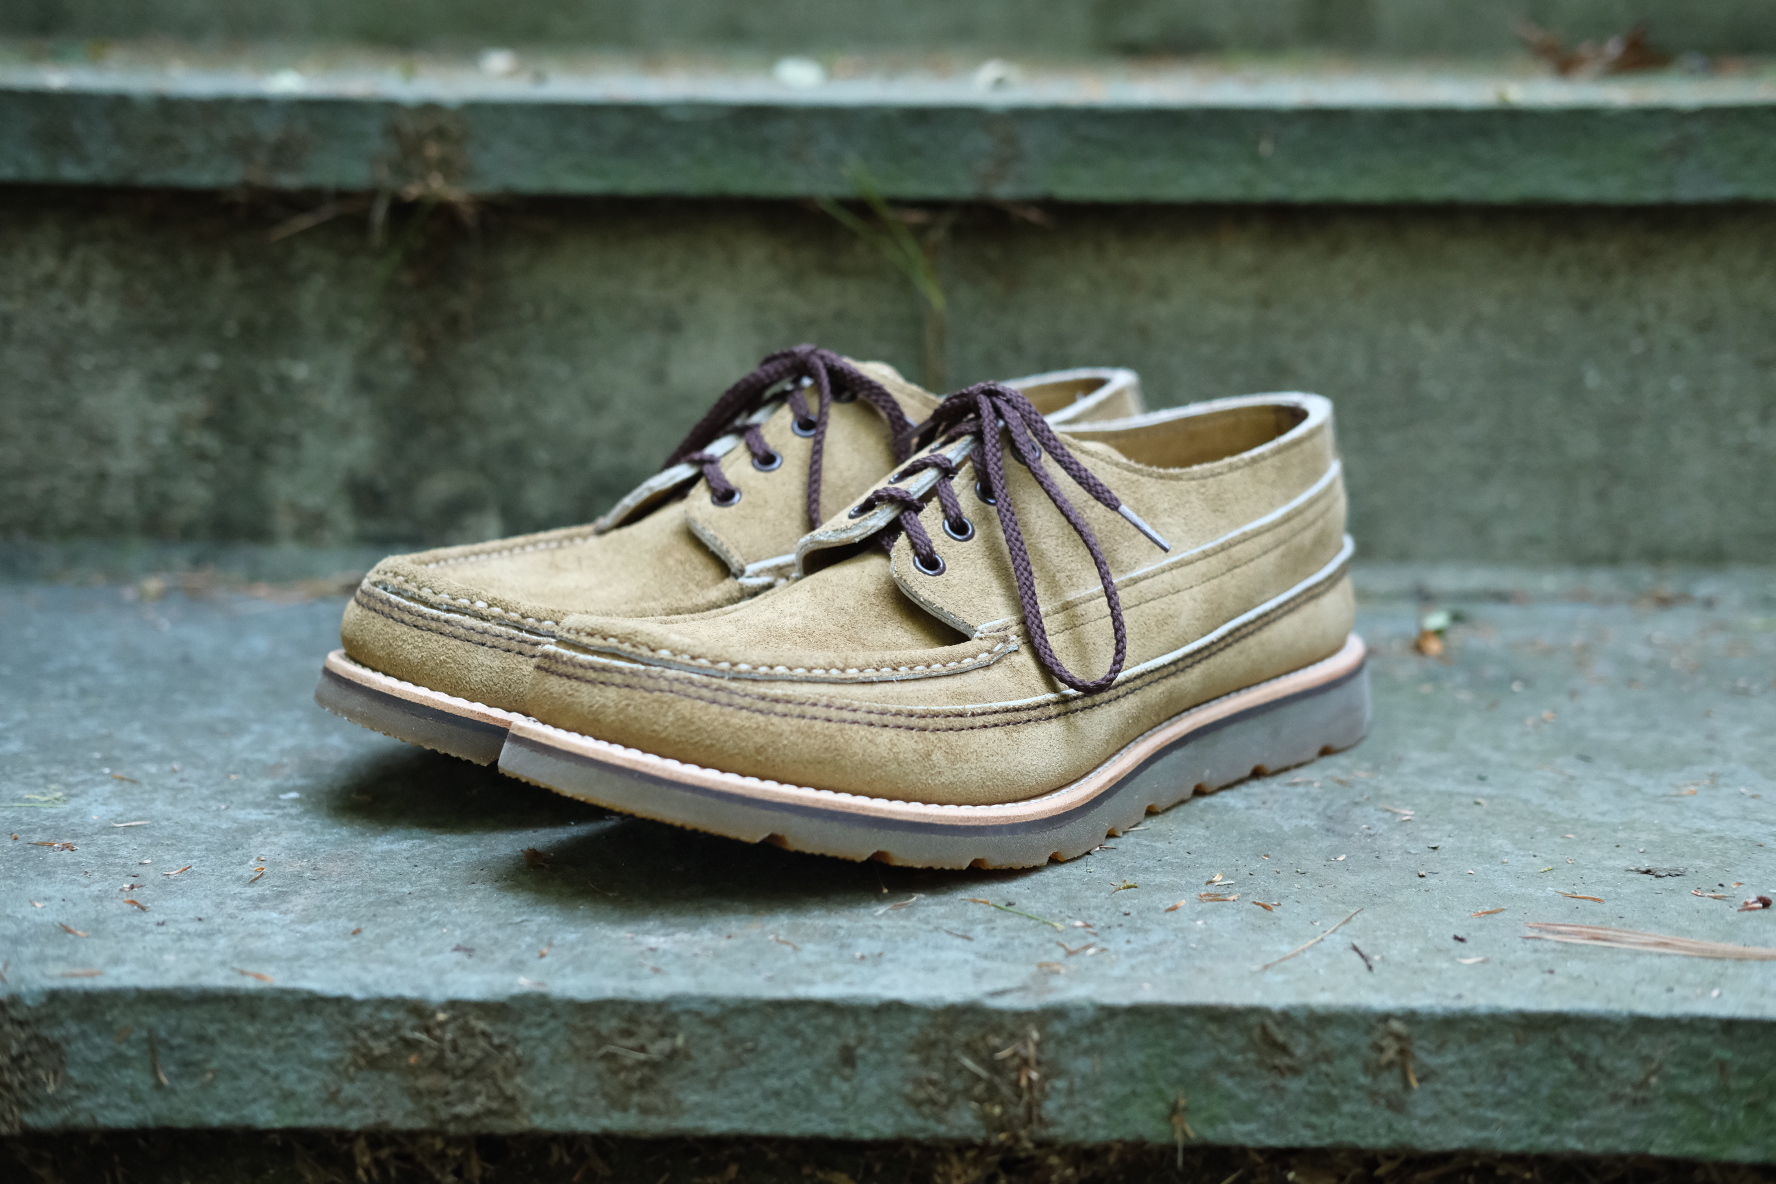 Shoes 'n' Boots of the Week: Stitchdown x Russell Moccasin, a New